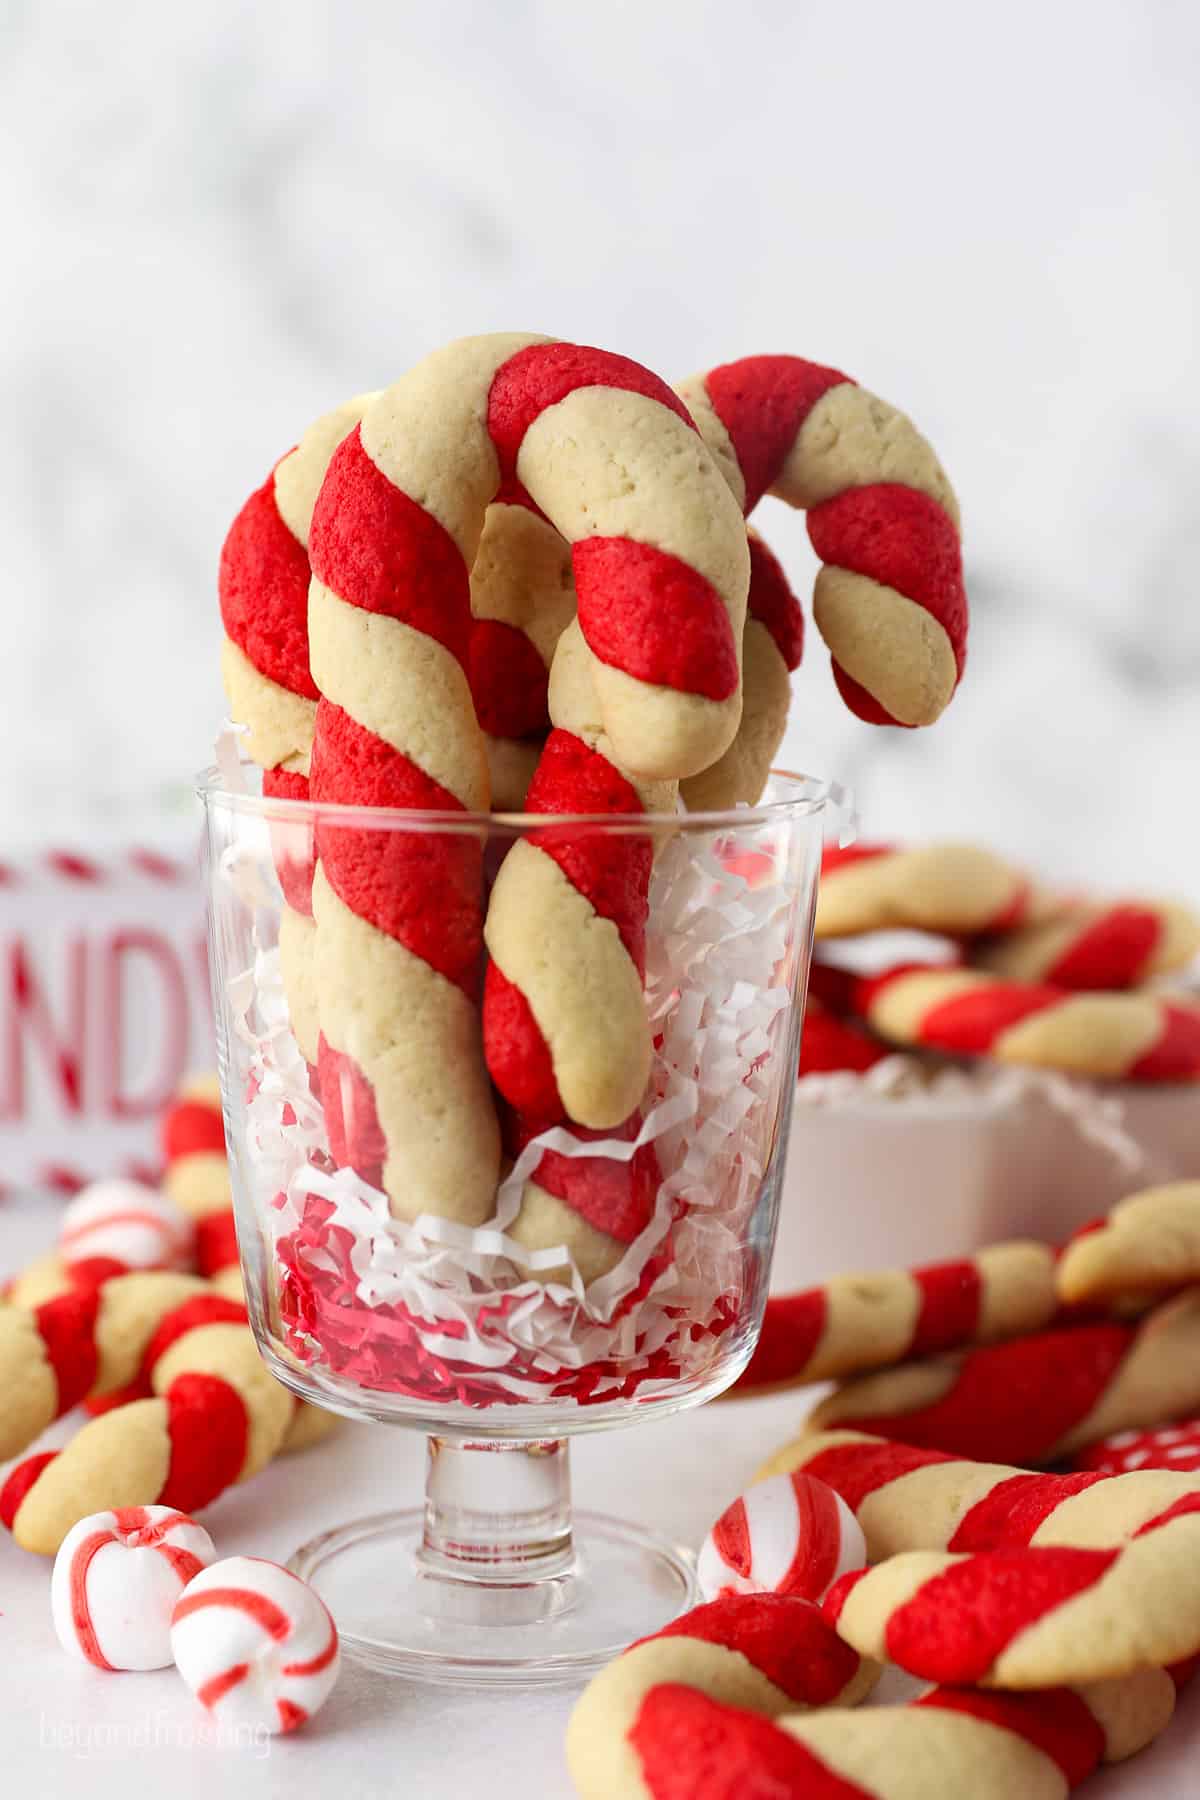 Candy cane cookies arranged in a glass, surrounded by more cookies on a white countertop.